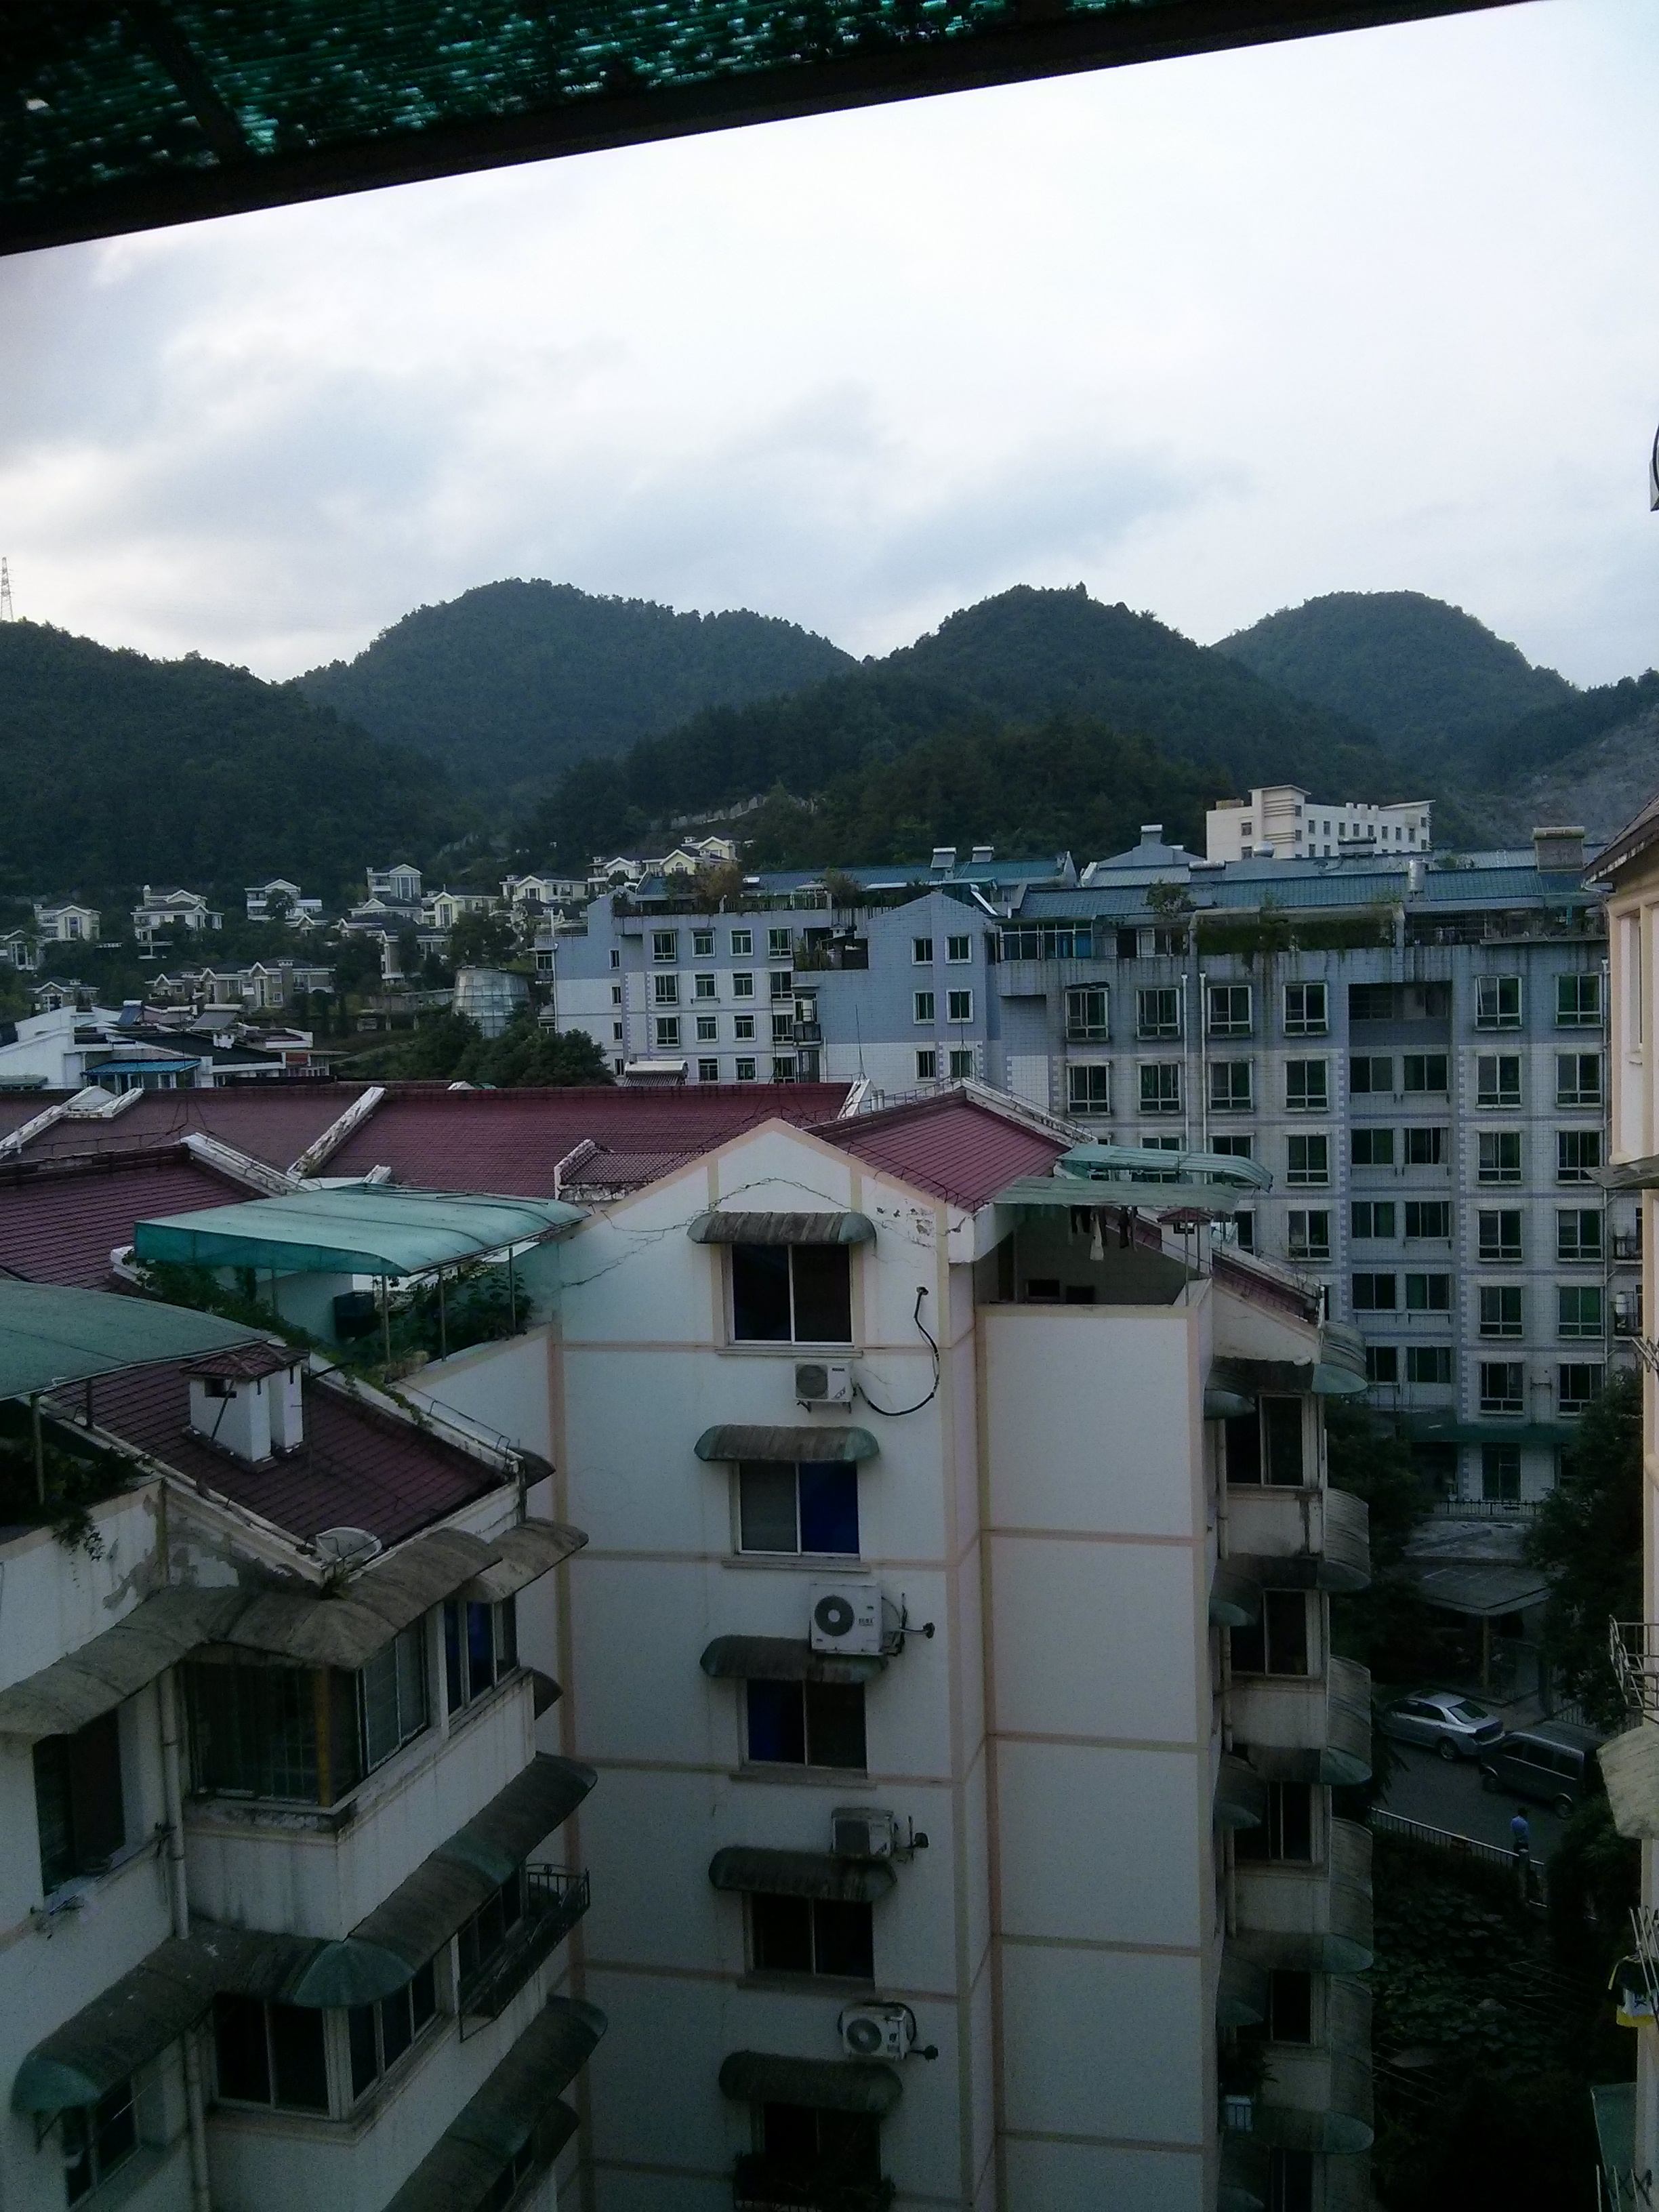 This was the view from our living room window in our last apartment.  Guiyang has basically been carved into the mountains.  Today we scooted through 3 tunnels as we explored the city.  If a mountain is in the way of progress...they carve a hole into it